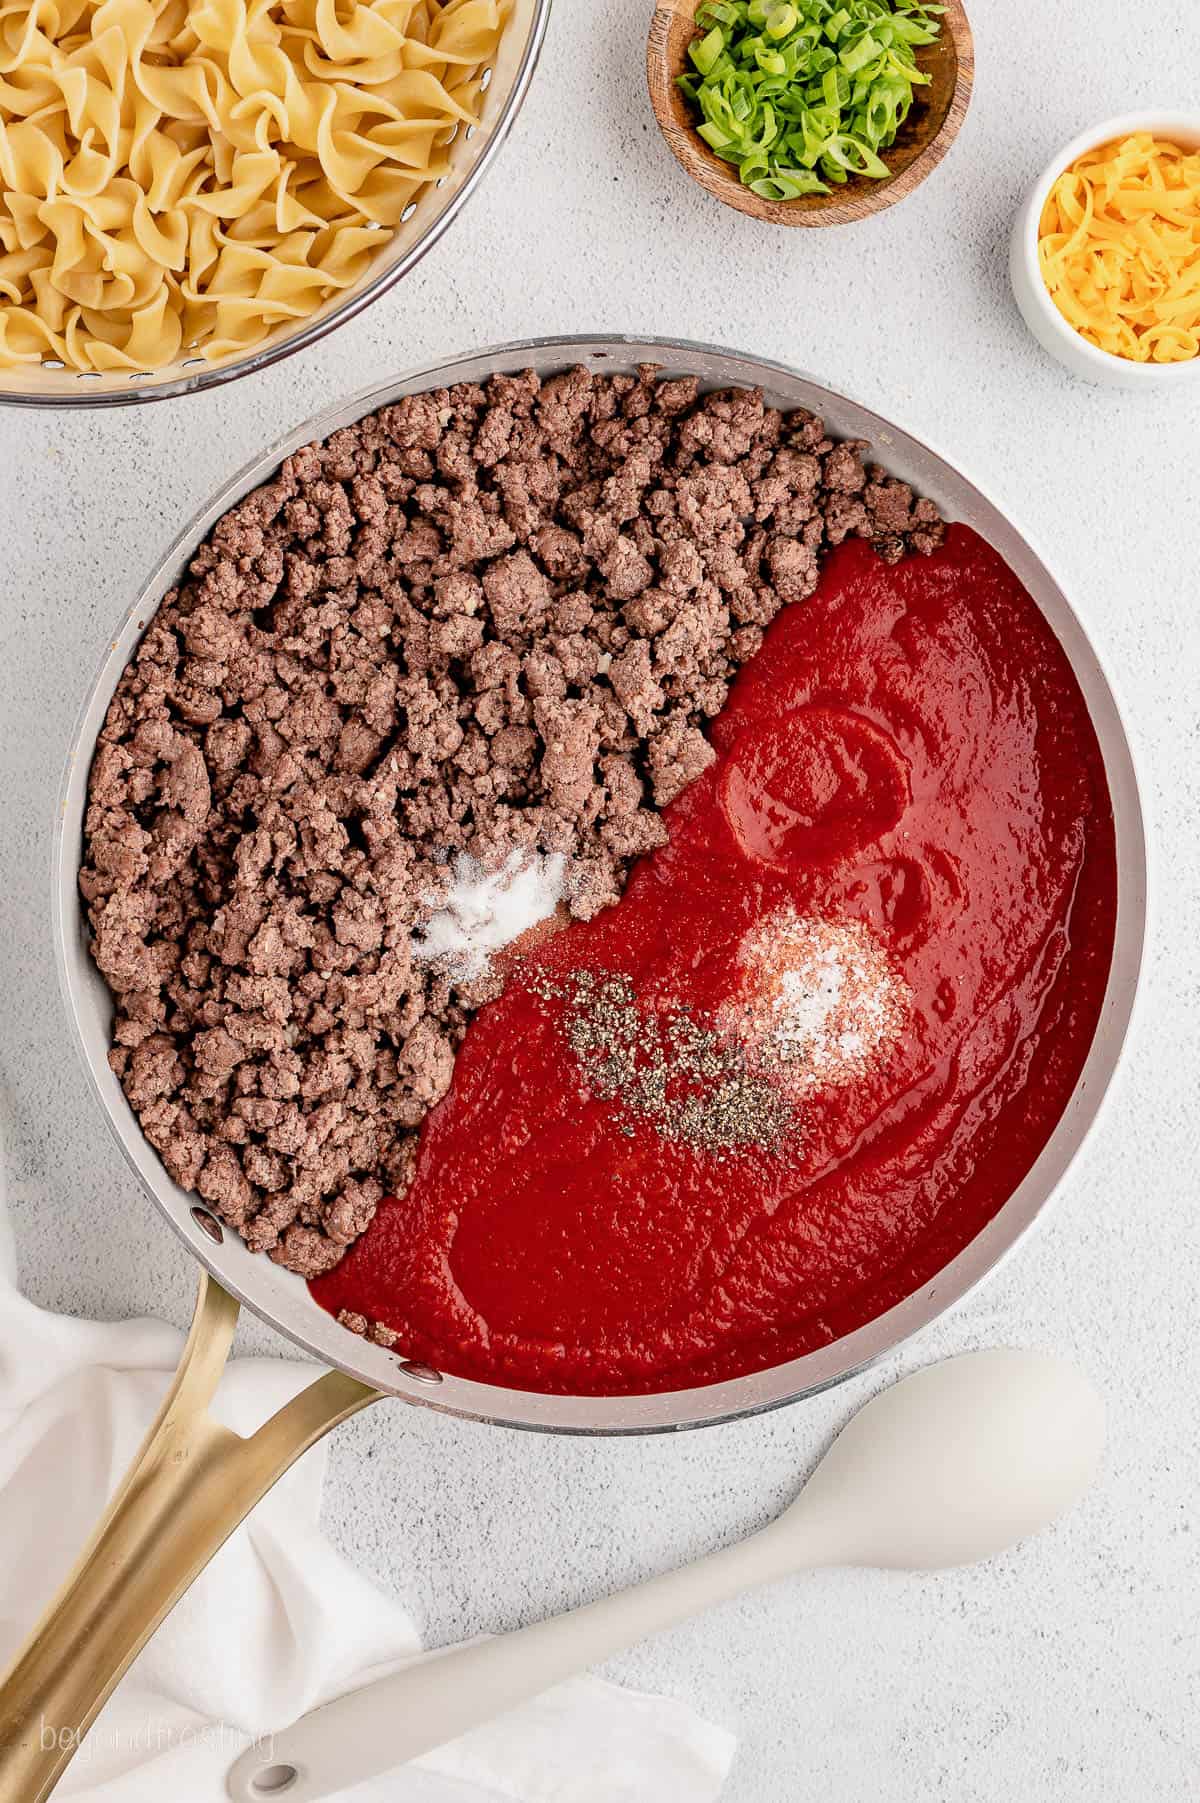 Tomato sauce, ground beef, and seasonings in a pan